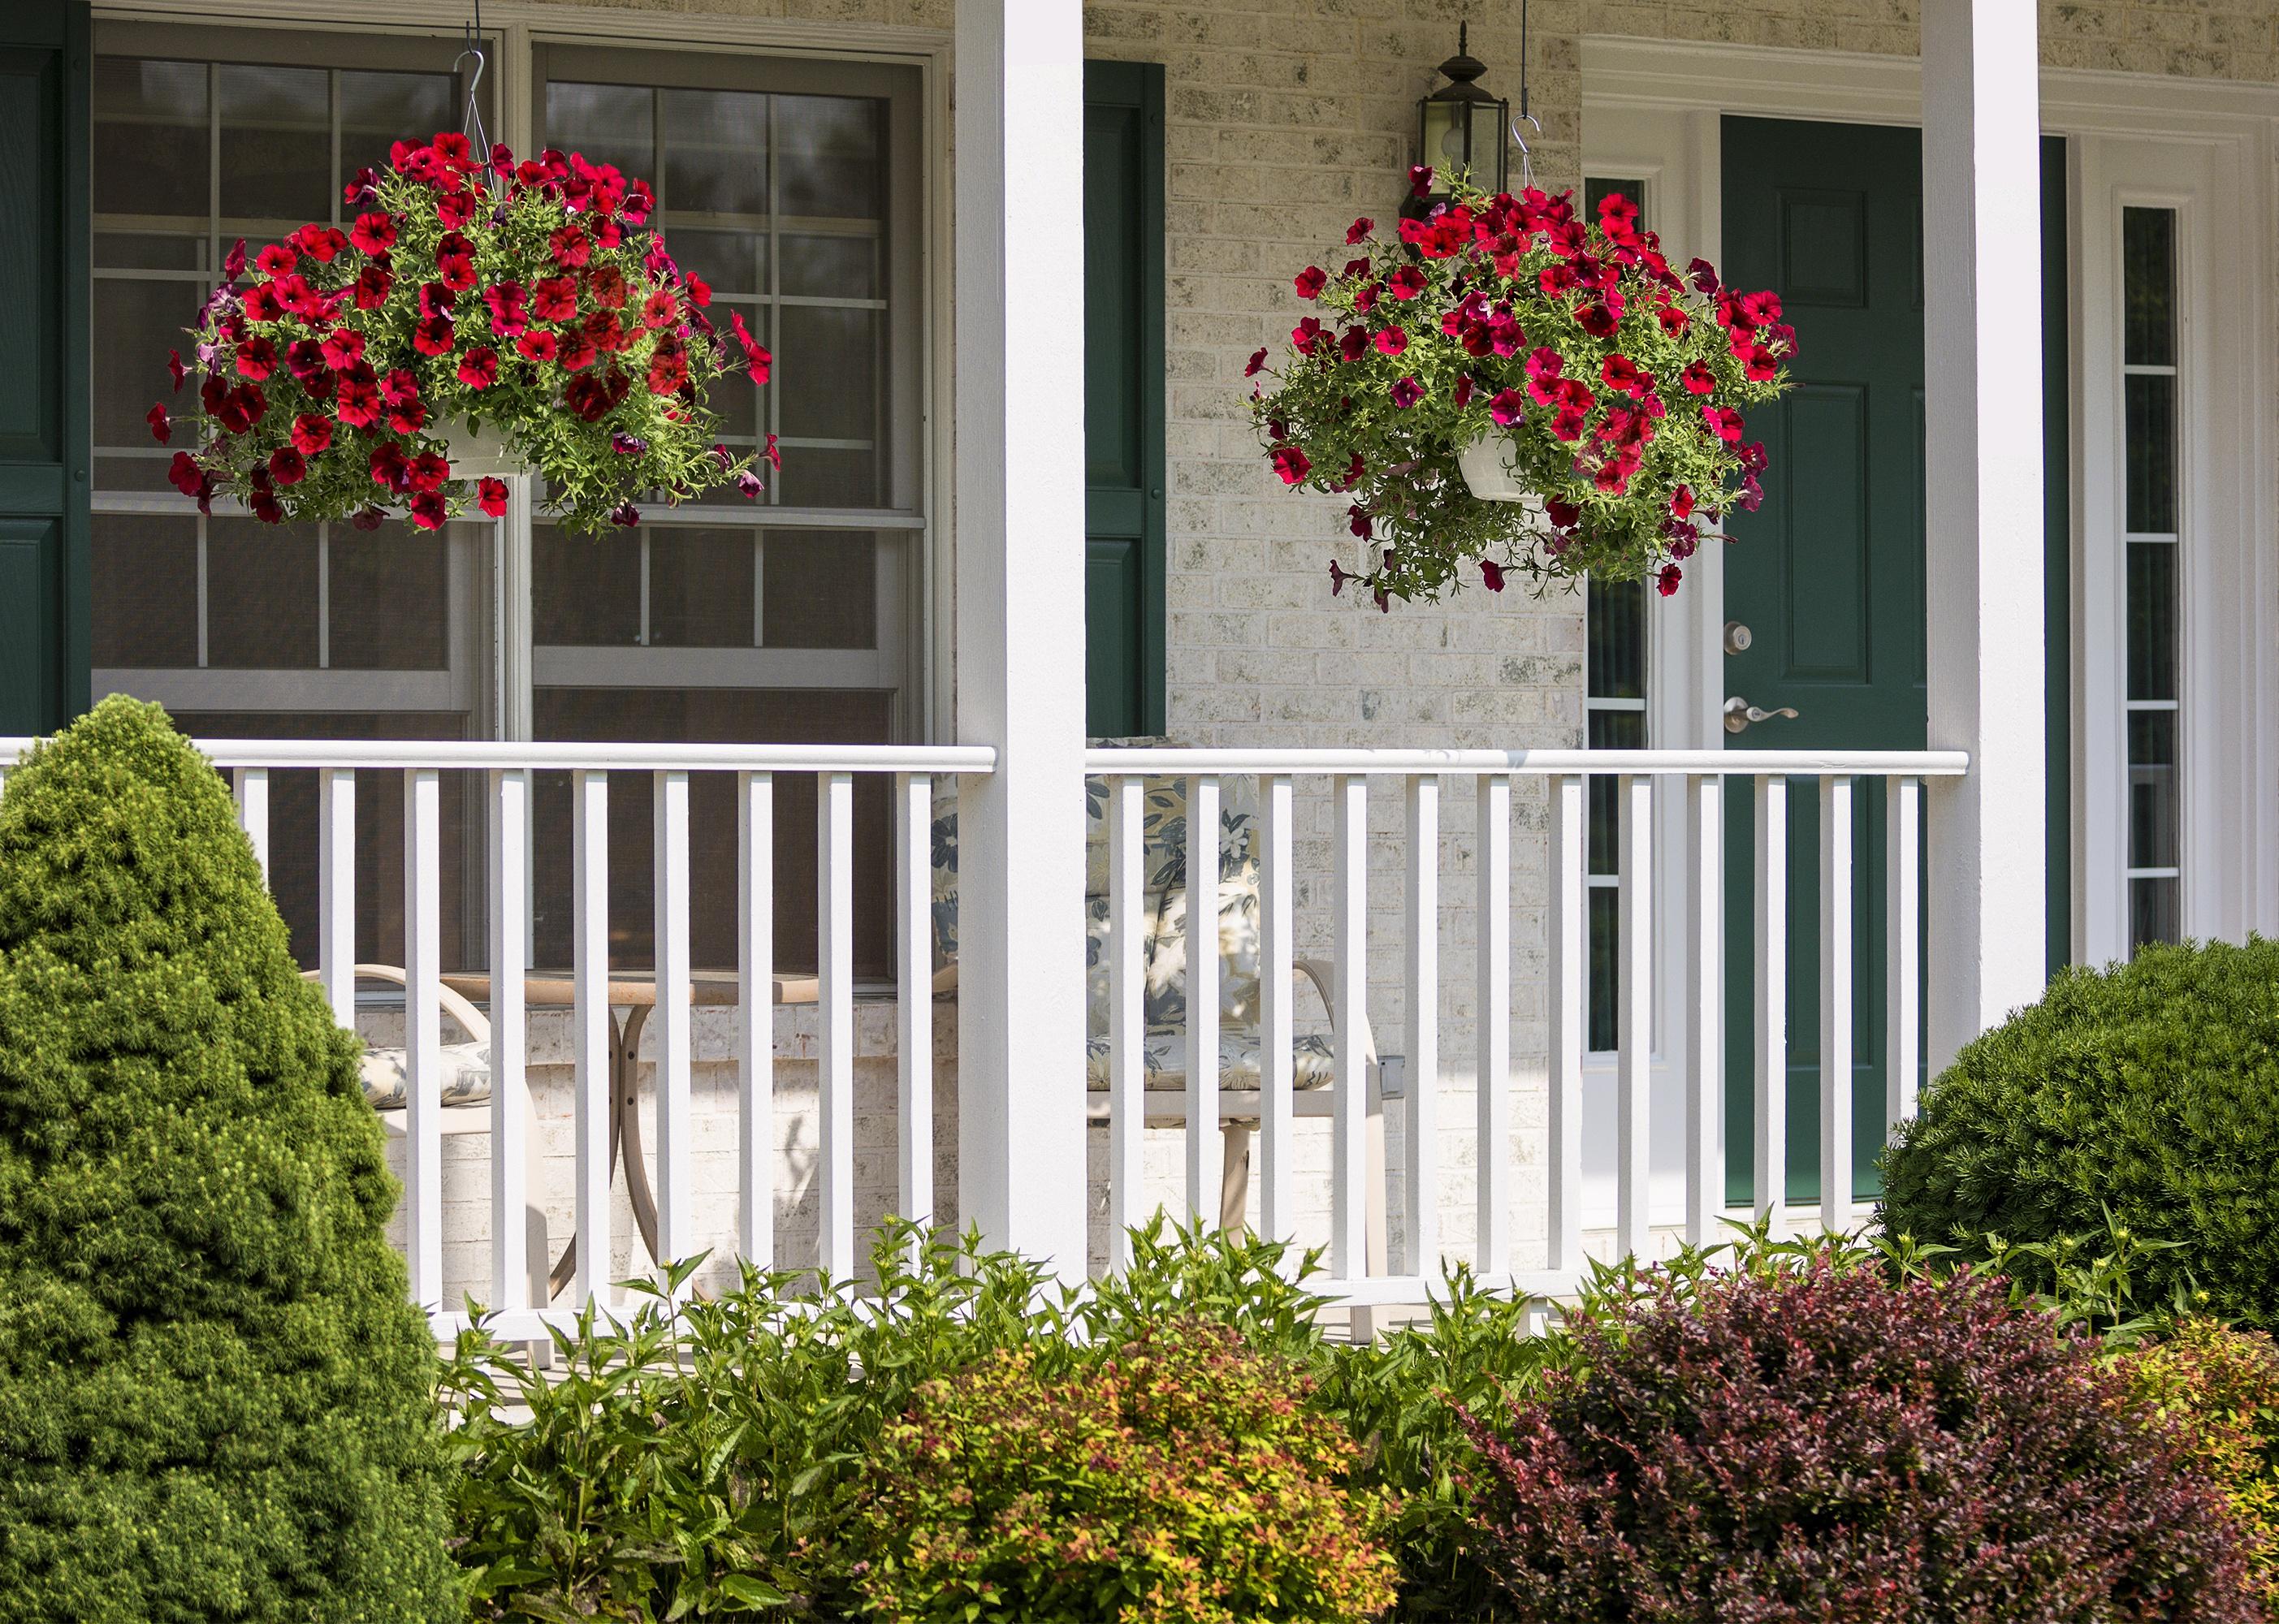 A front porch with hanging flower baskets.